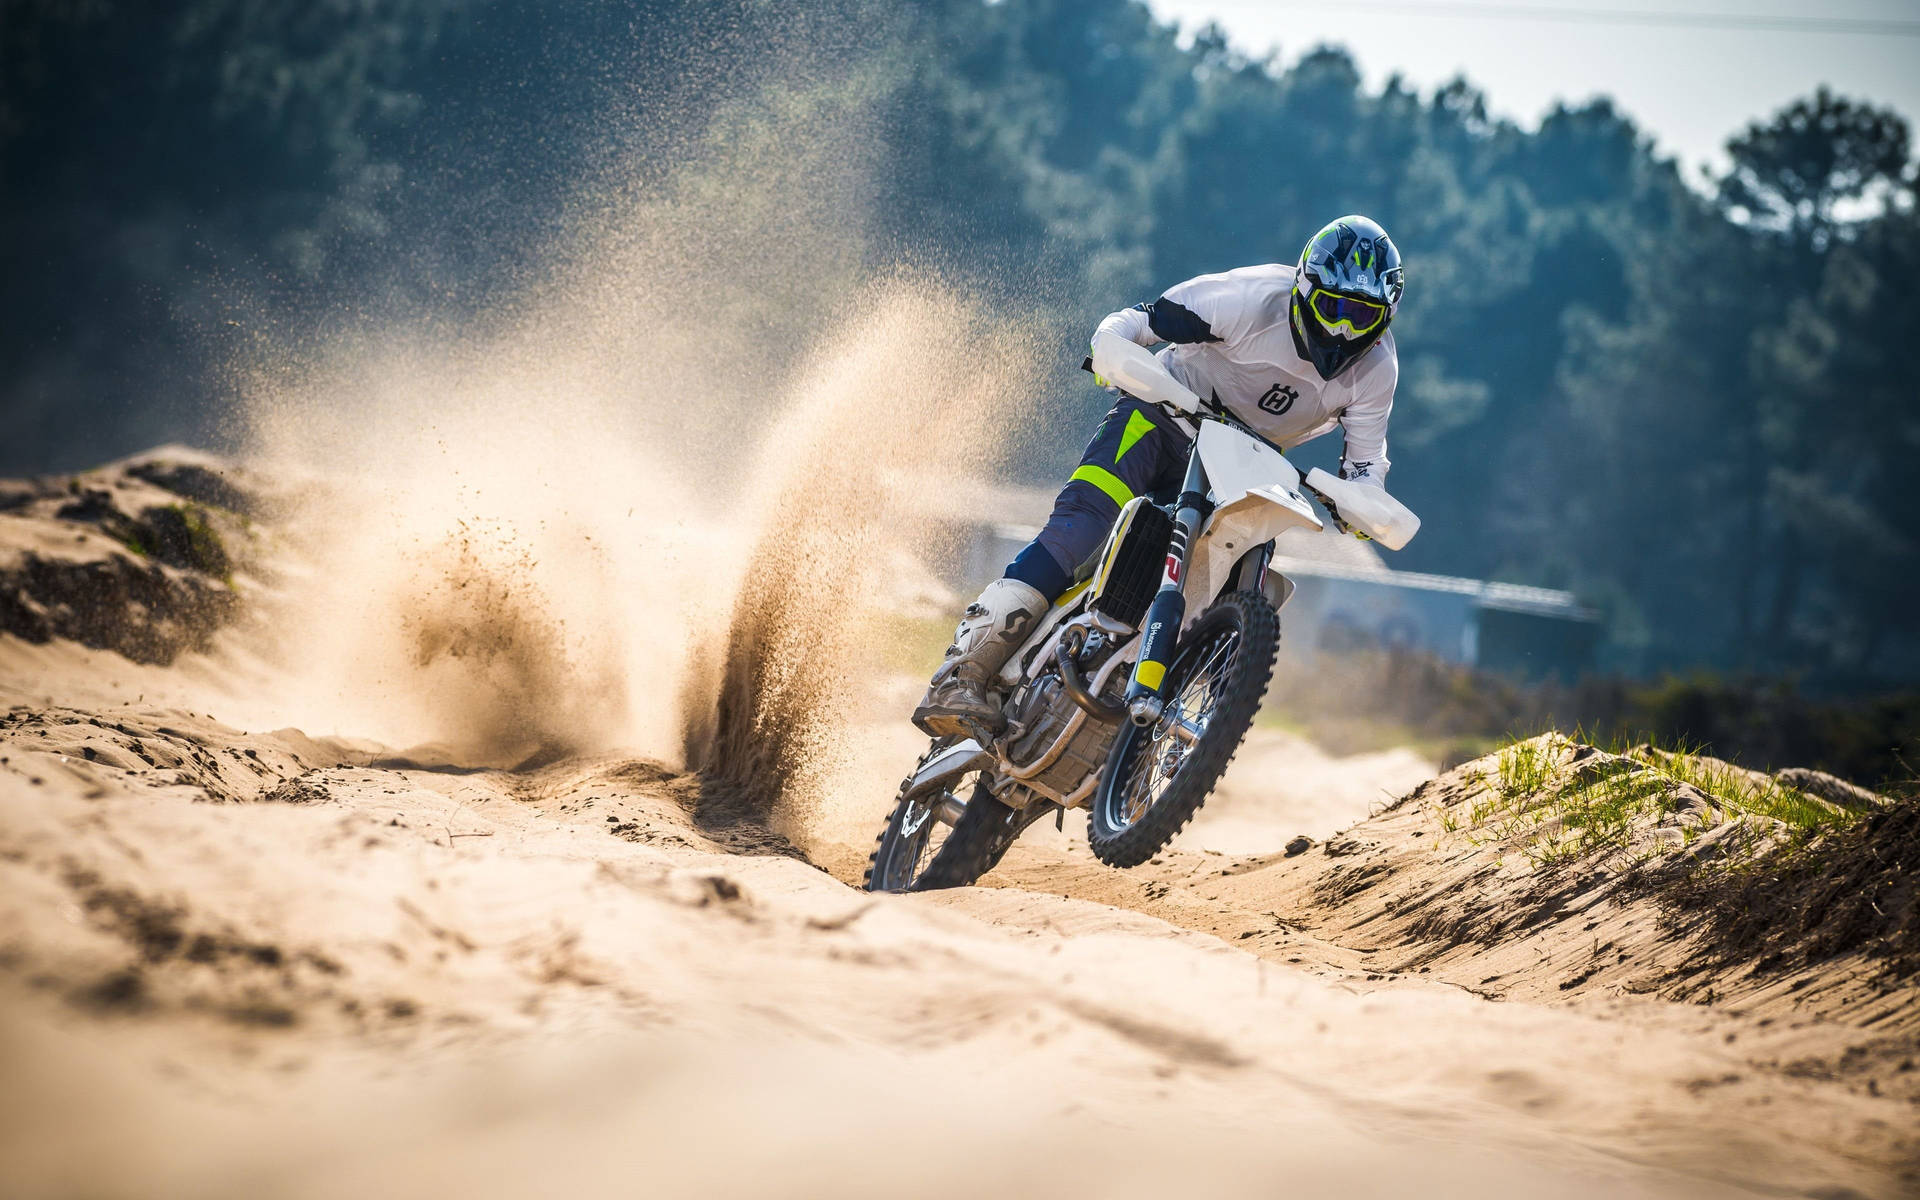 Exciting Motocross Racing in Action Wallpaper